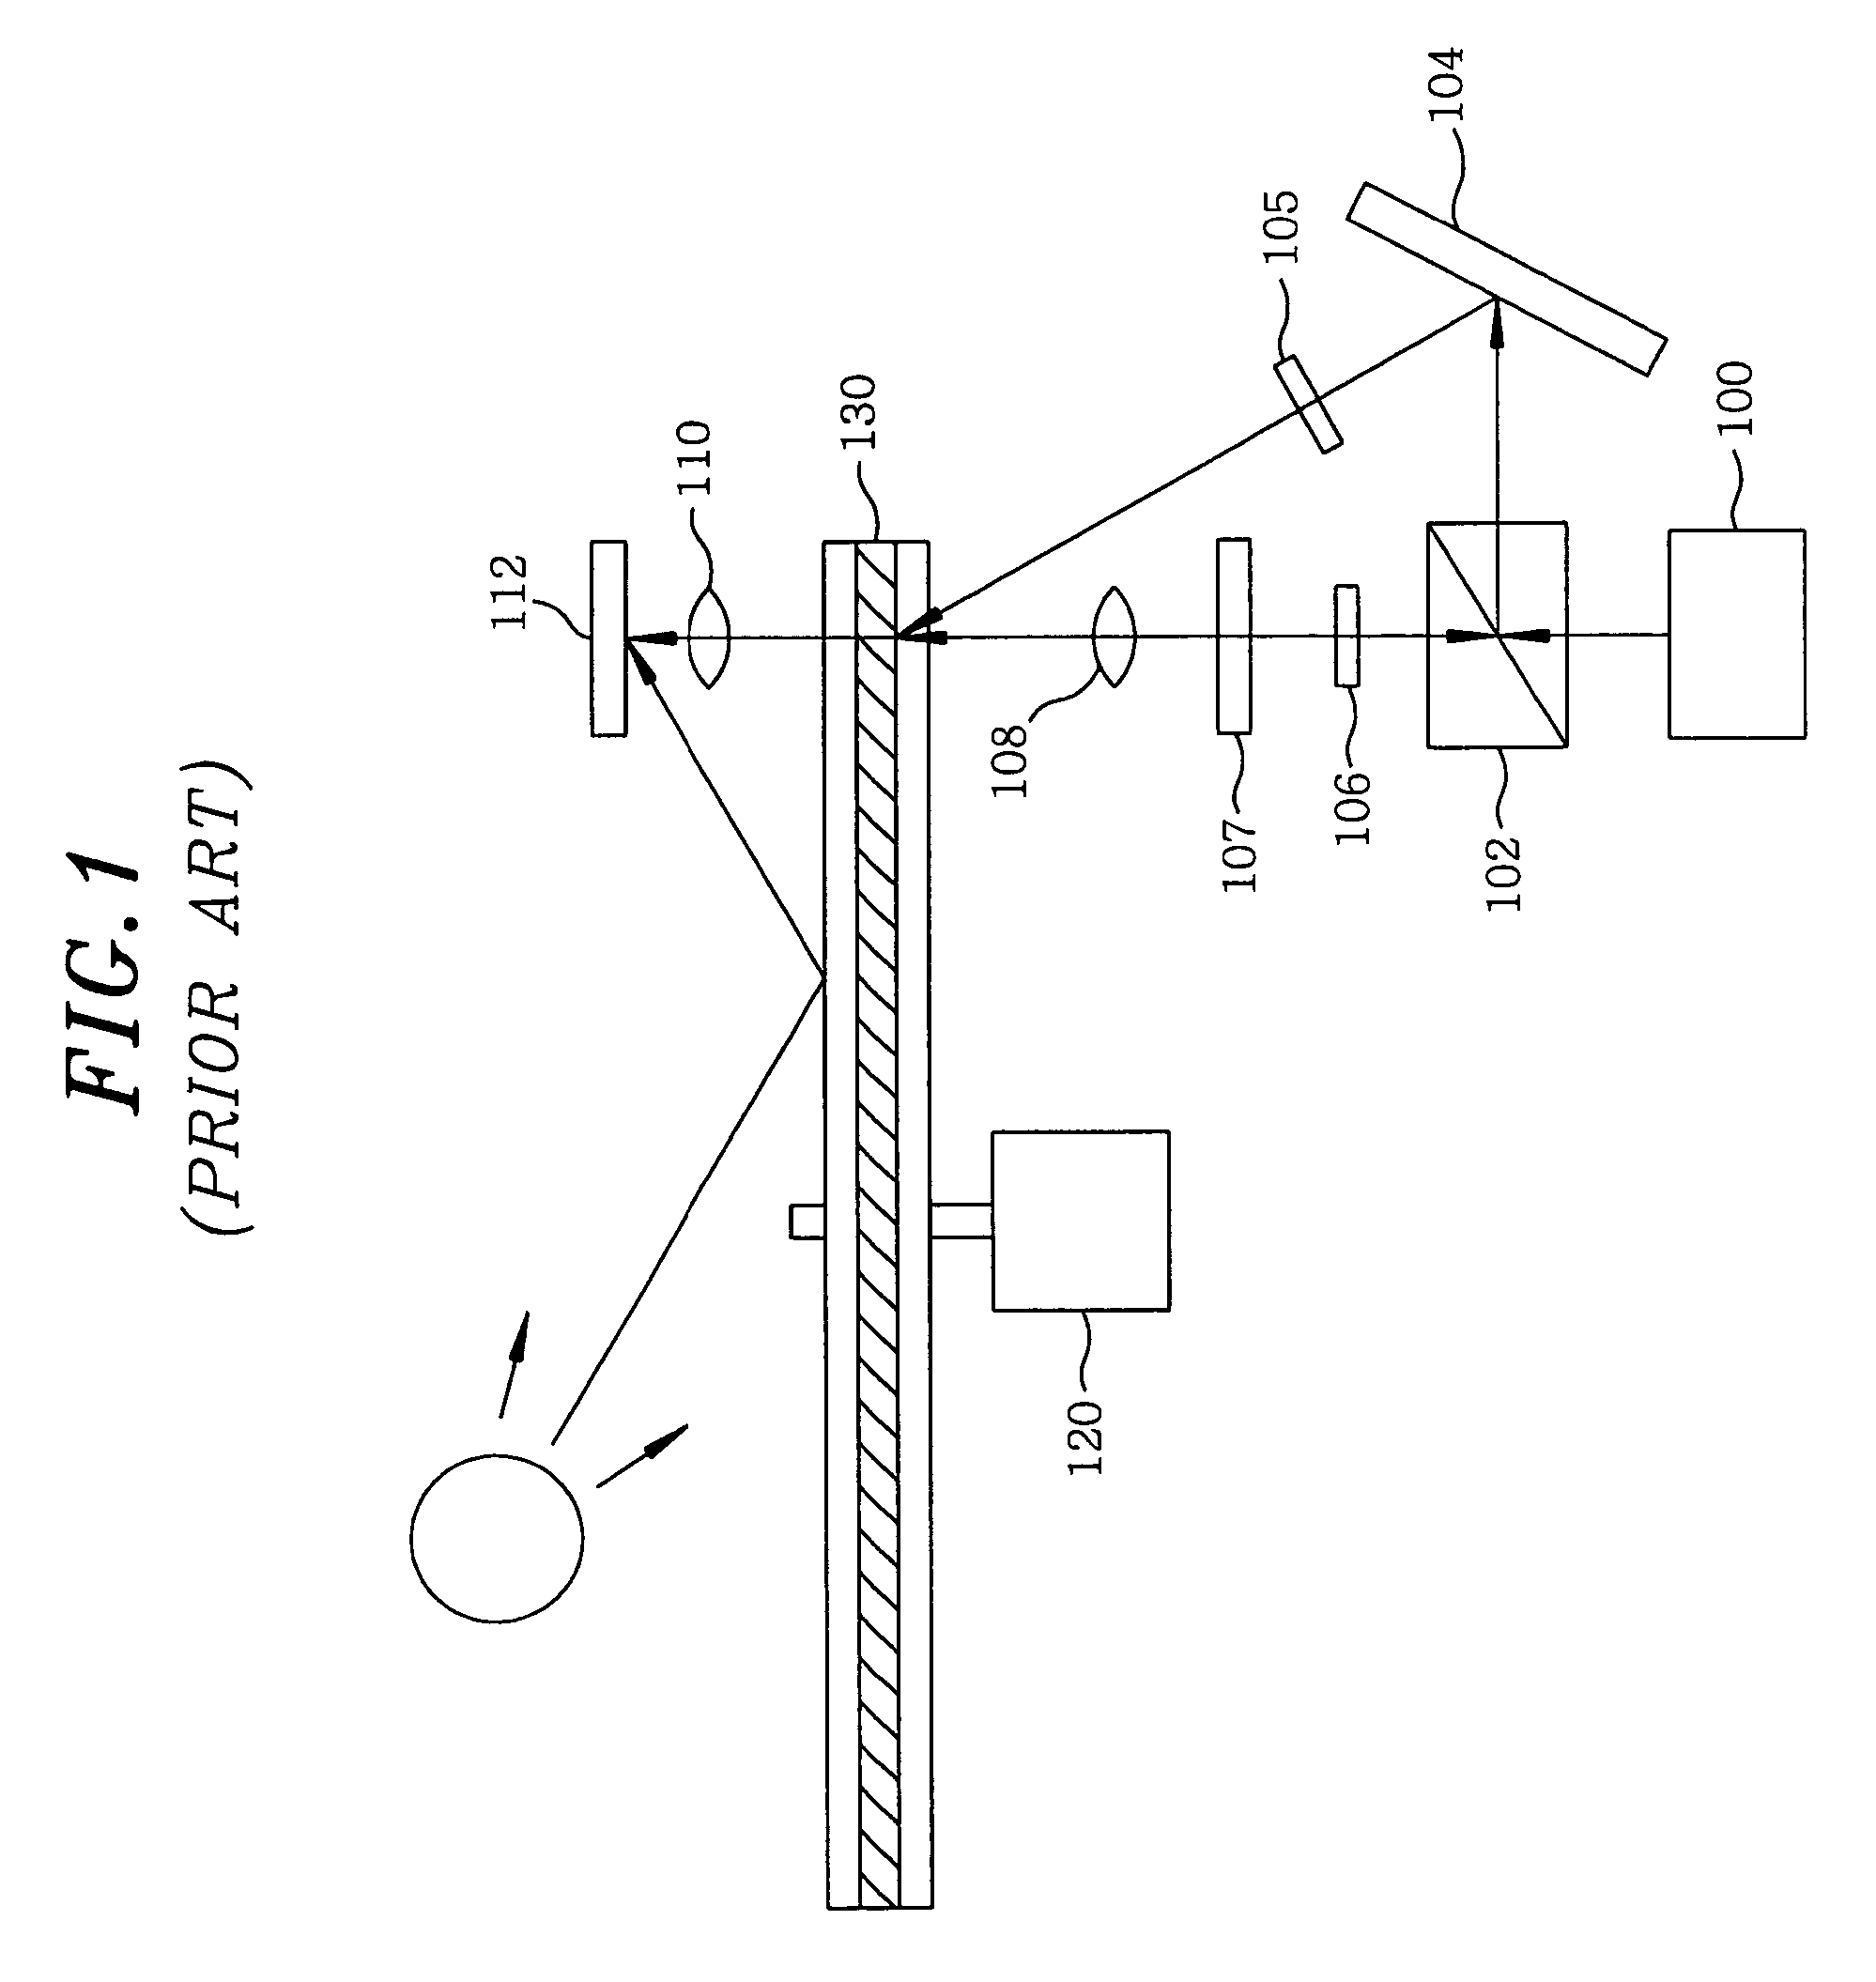 Holographic memory system including a photodetecting device provided with a band-pass filter